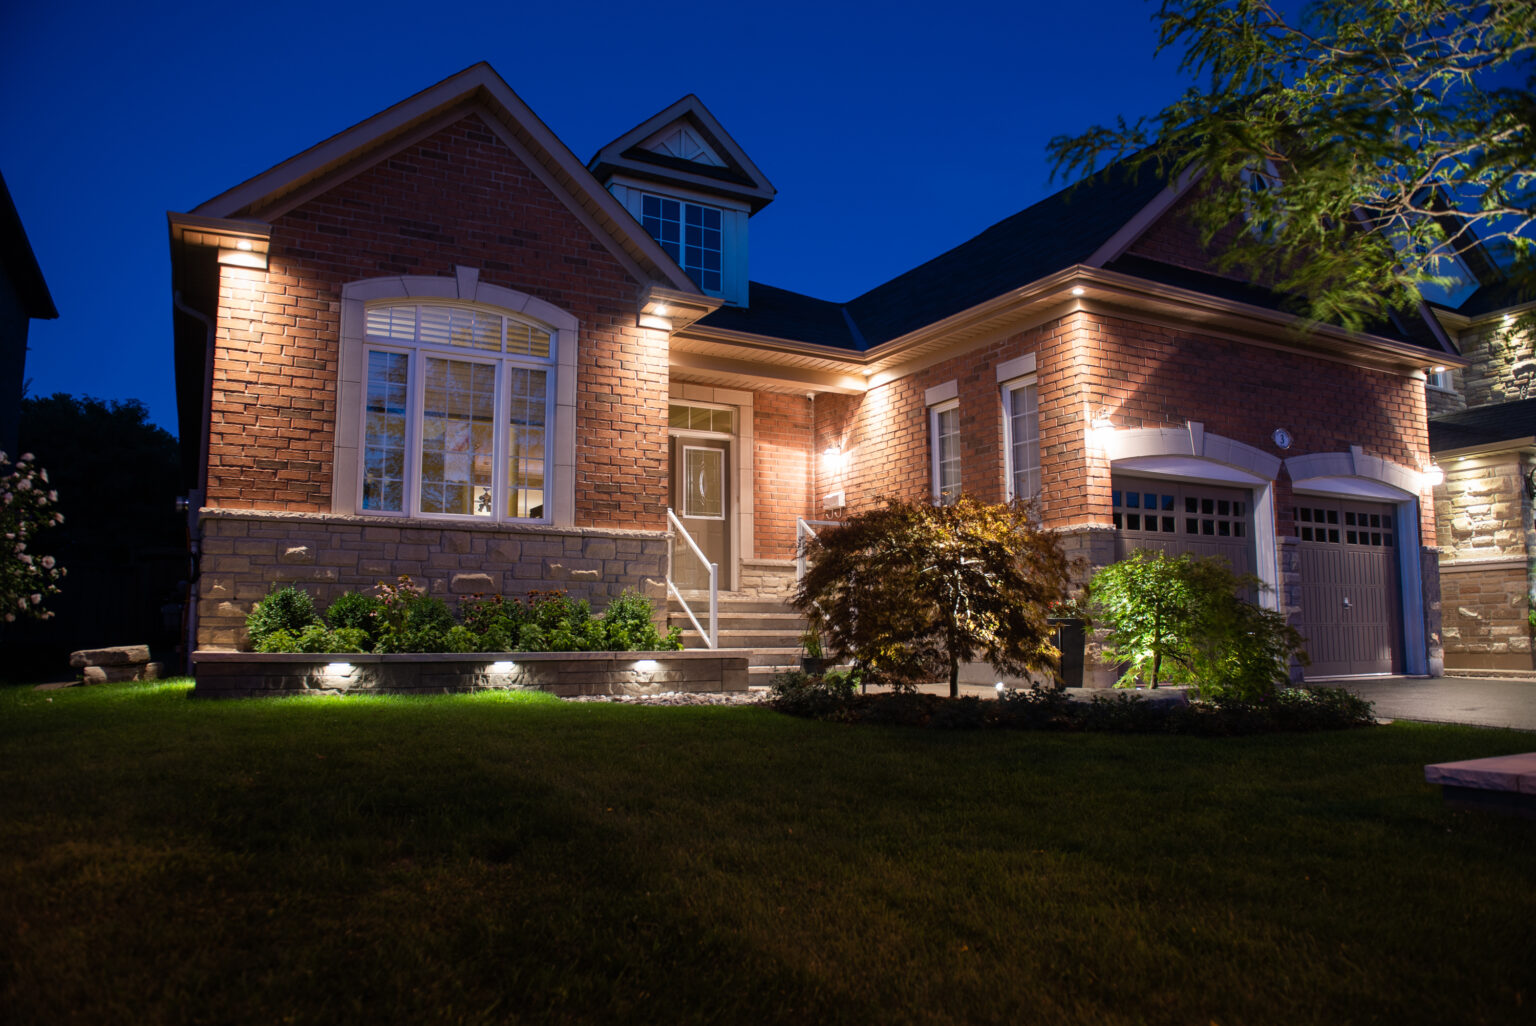 Ways of Curb Appeal - Lighting